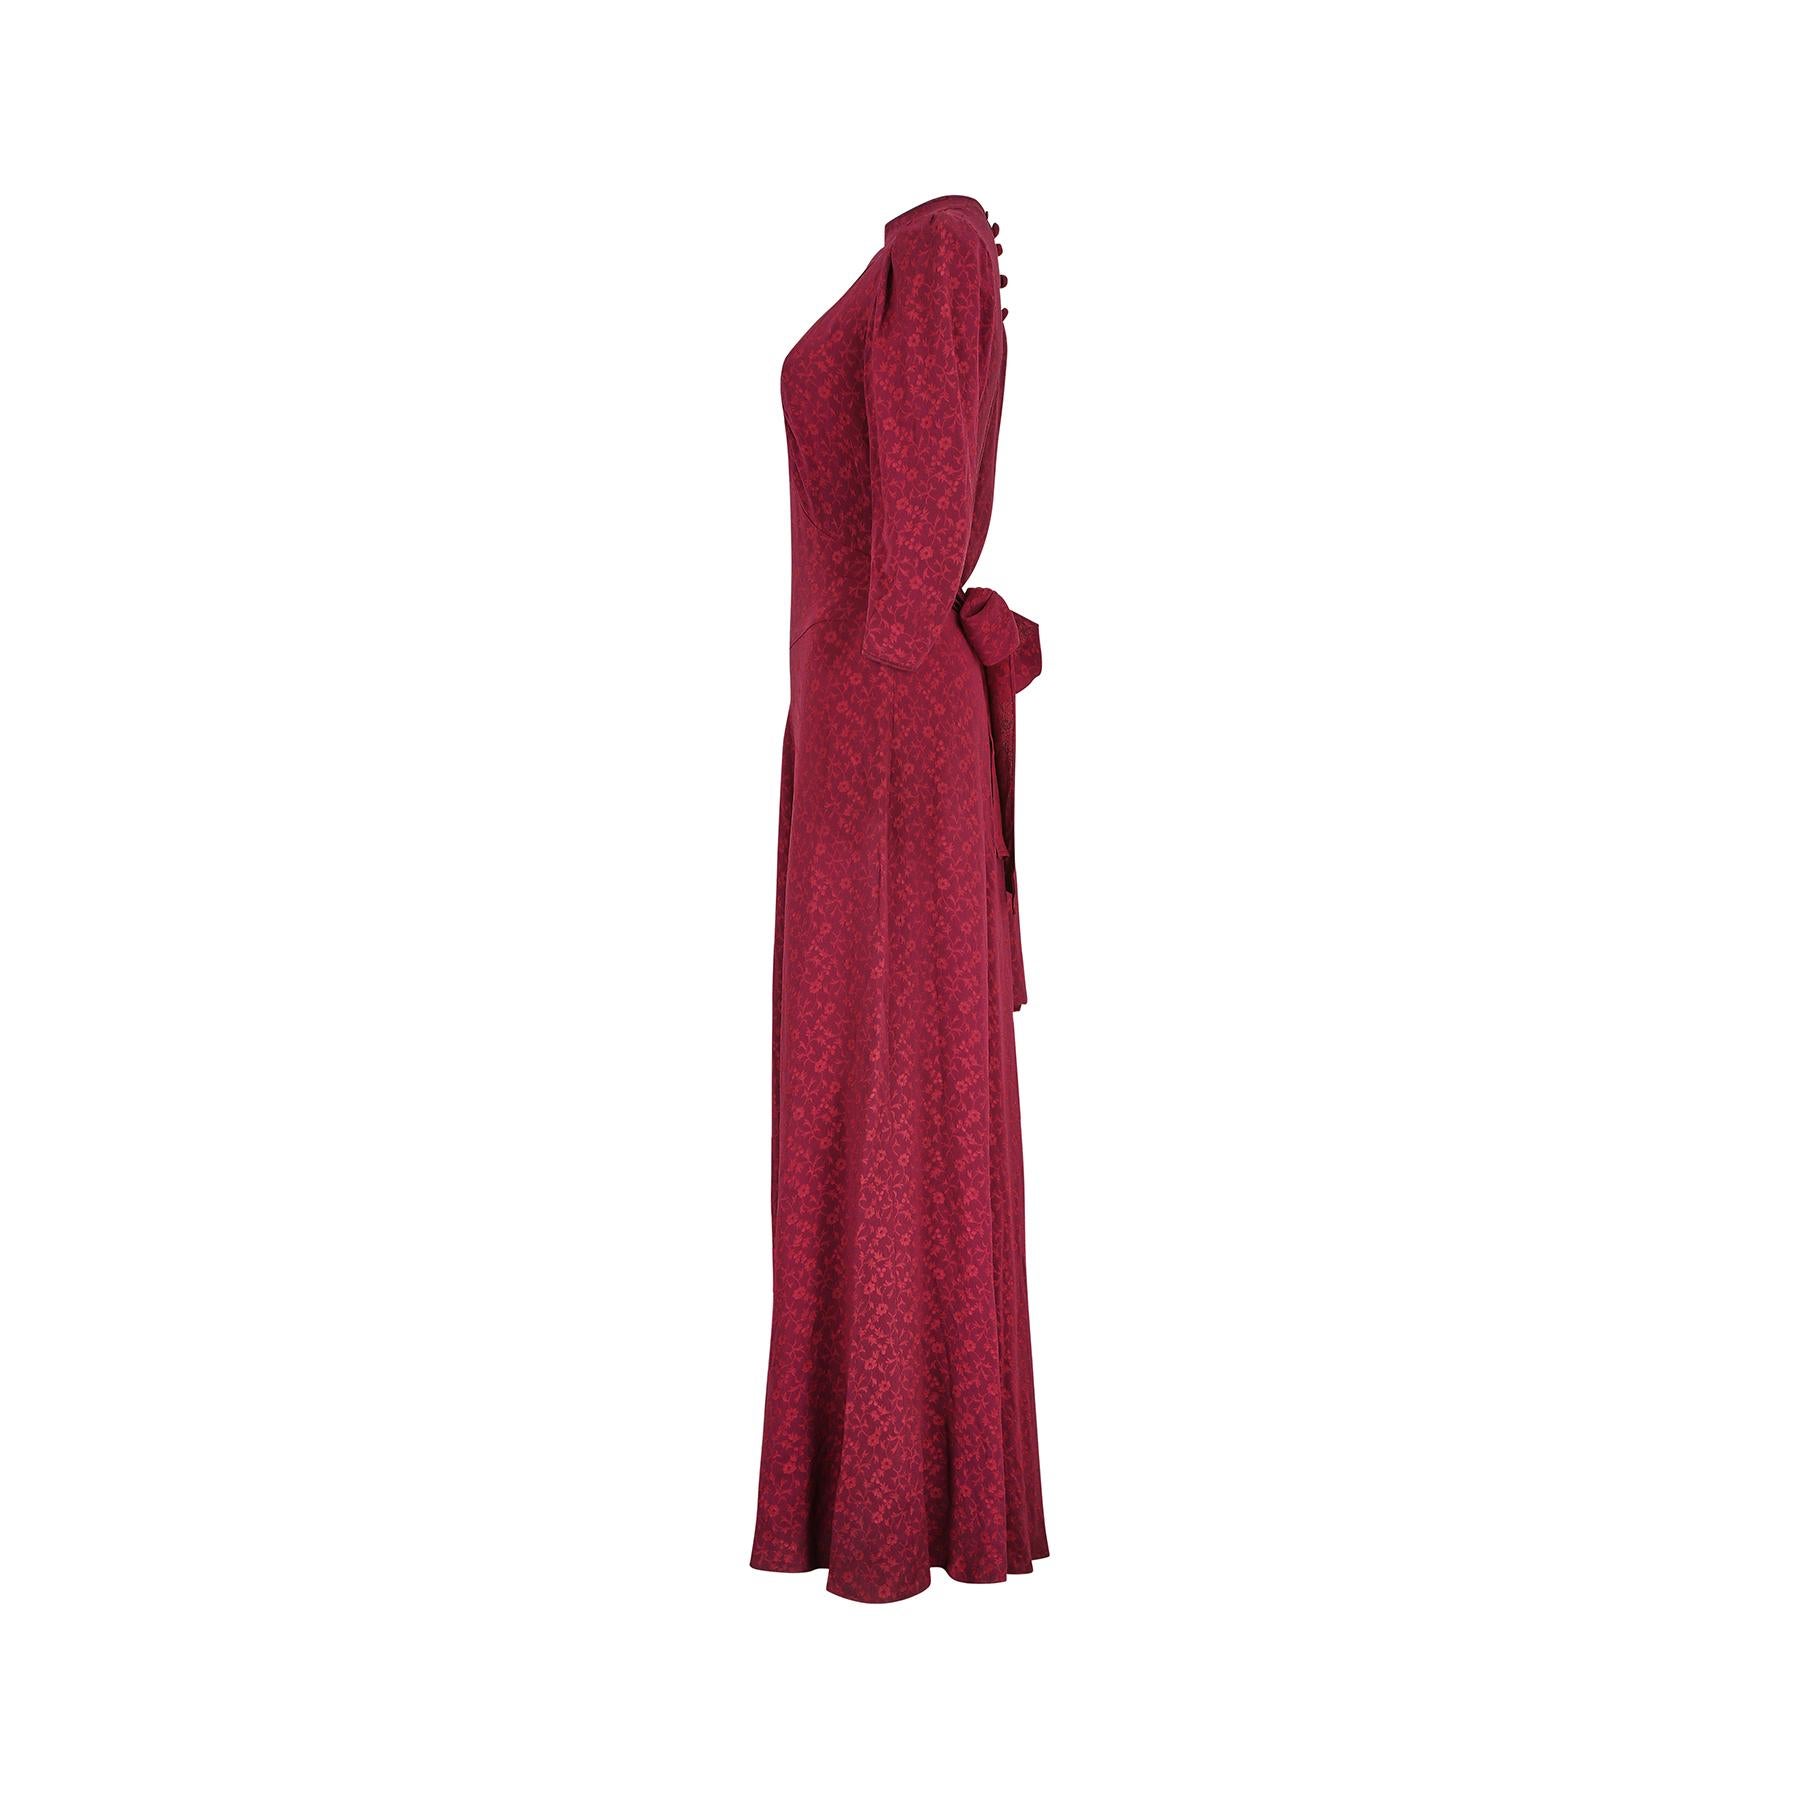 Very late 1930s to early 1940s floral print burgundy textured crepe dress.  Old Hollywood full-length style with a fitted and inverted T shaped bodice and wide waist band with a flared skirt. It has a high round neck and dainty puffed three-quarter